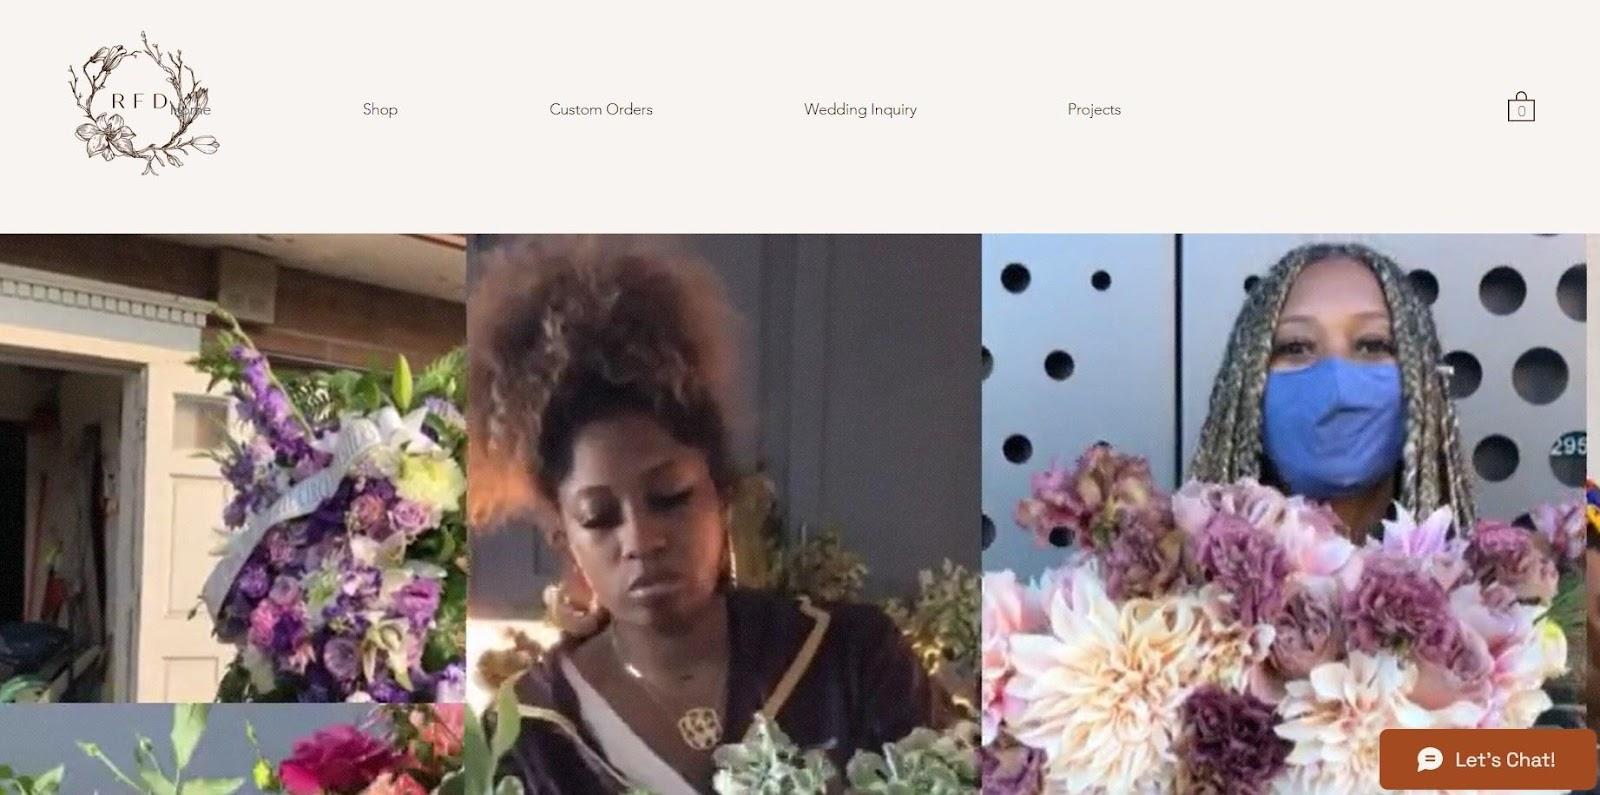 Best florist websites — design example from Rooted Floral.